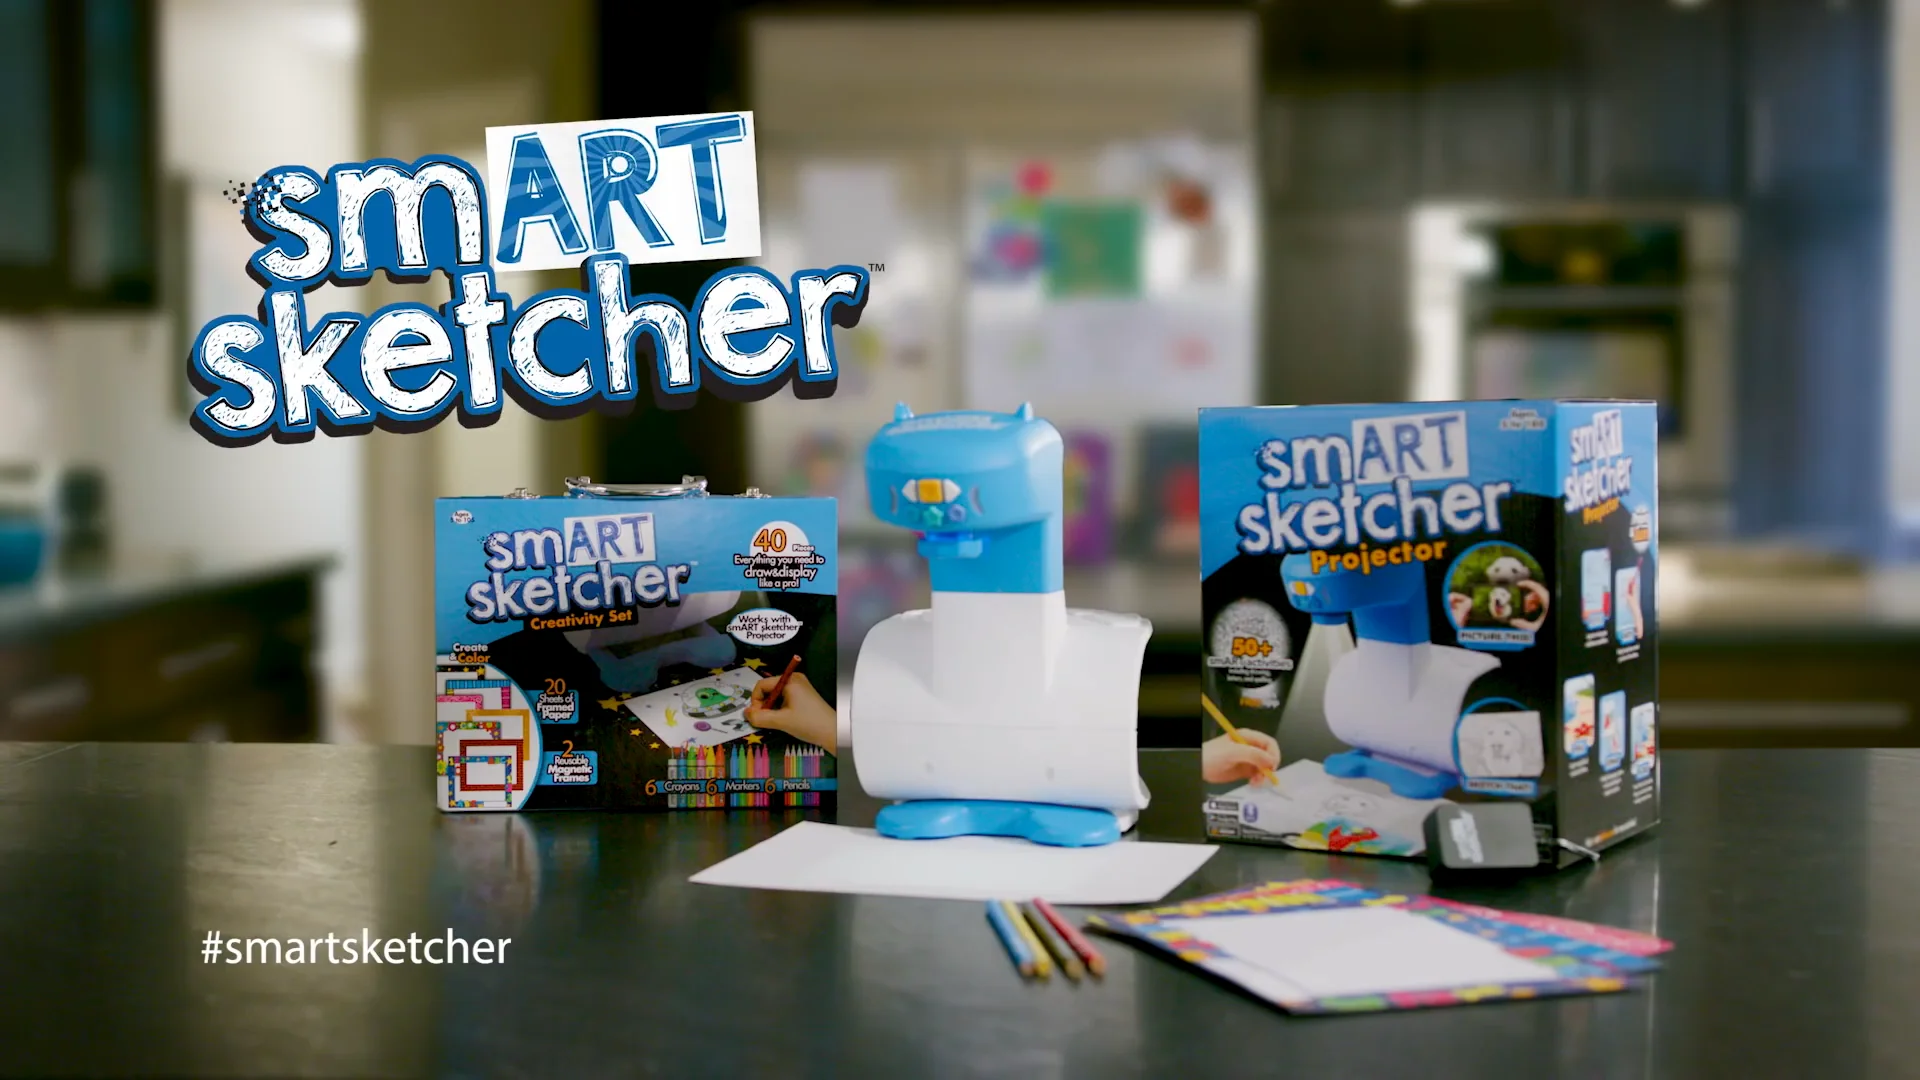 Smart Sketcher; set up and how to use 